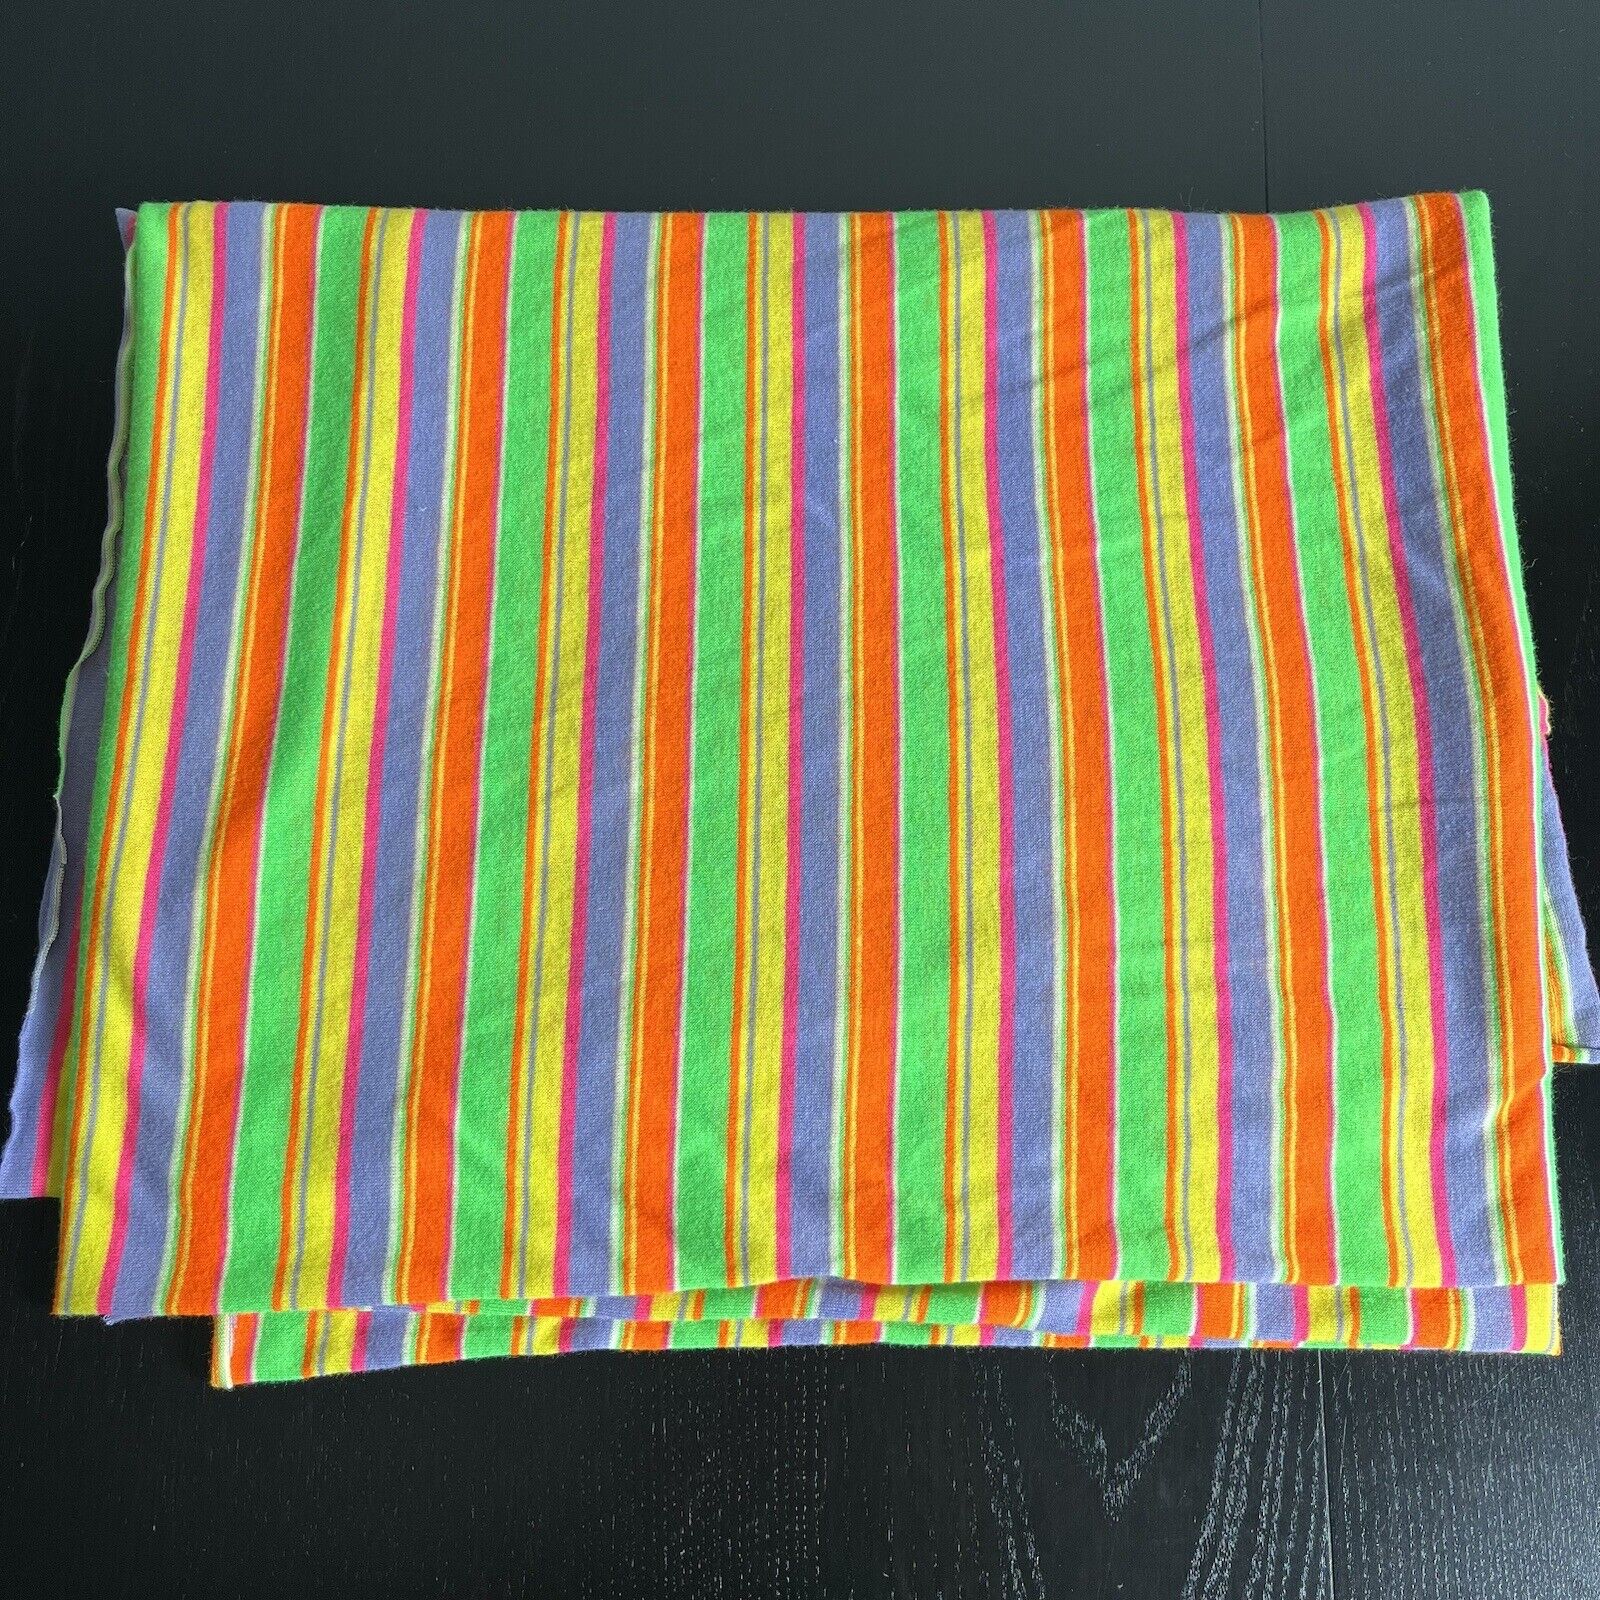 Vintage 60s/70s Neon Striped Colorful Synthetic Polyester Fabric 2.2 Yards